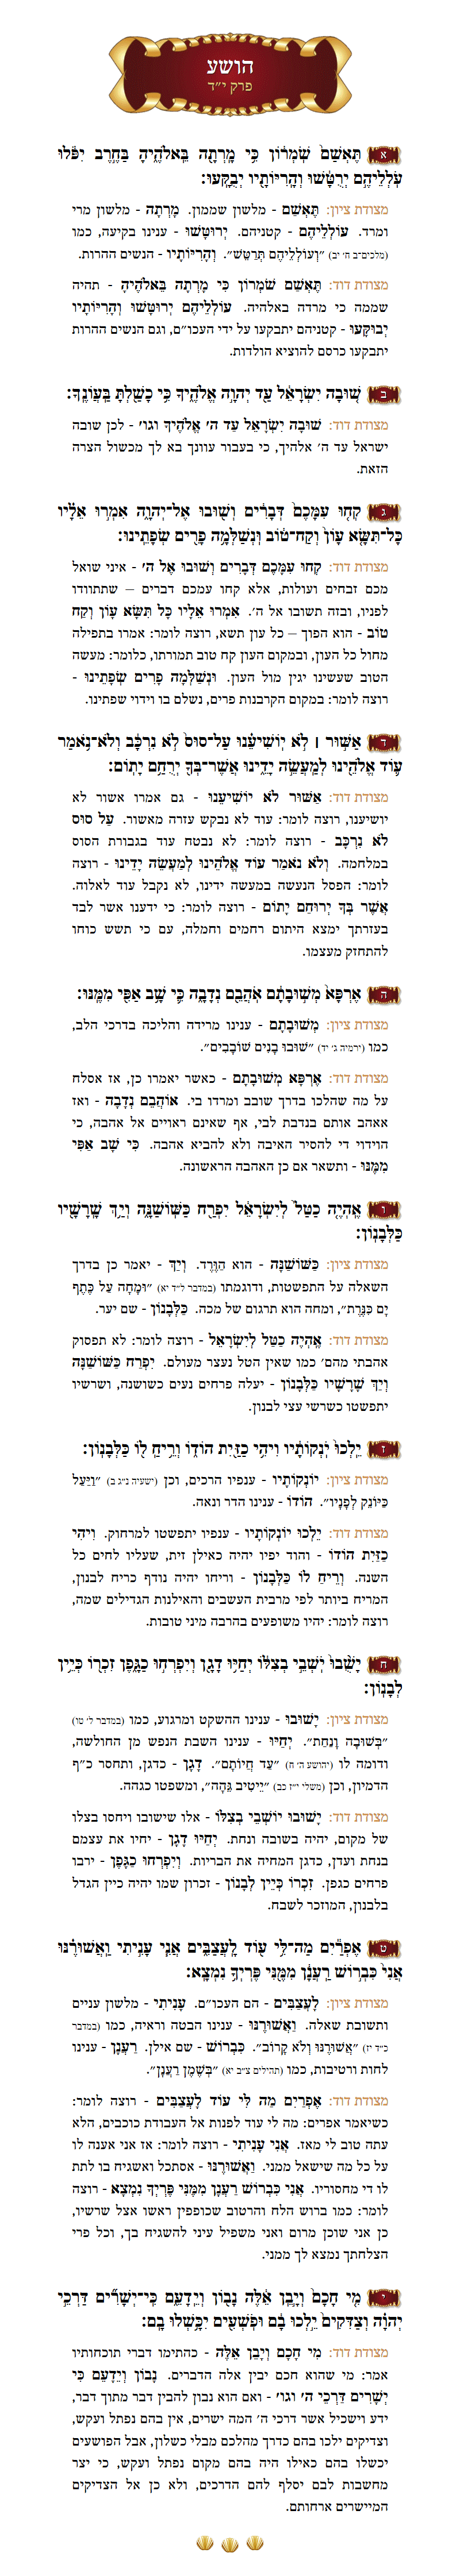 Sefer Hoshea Chapter 14 with commentary